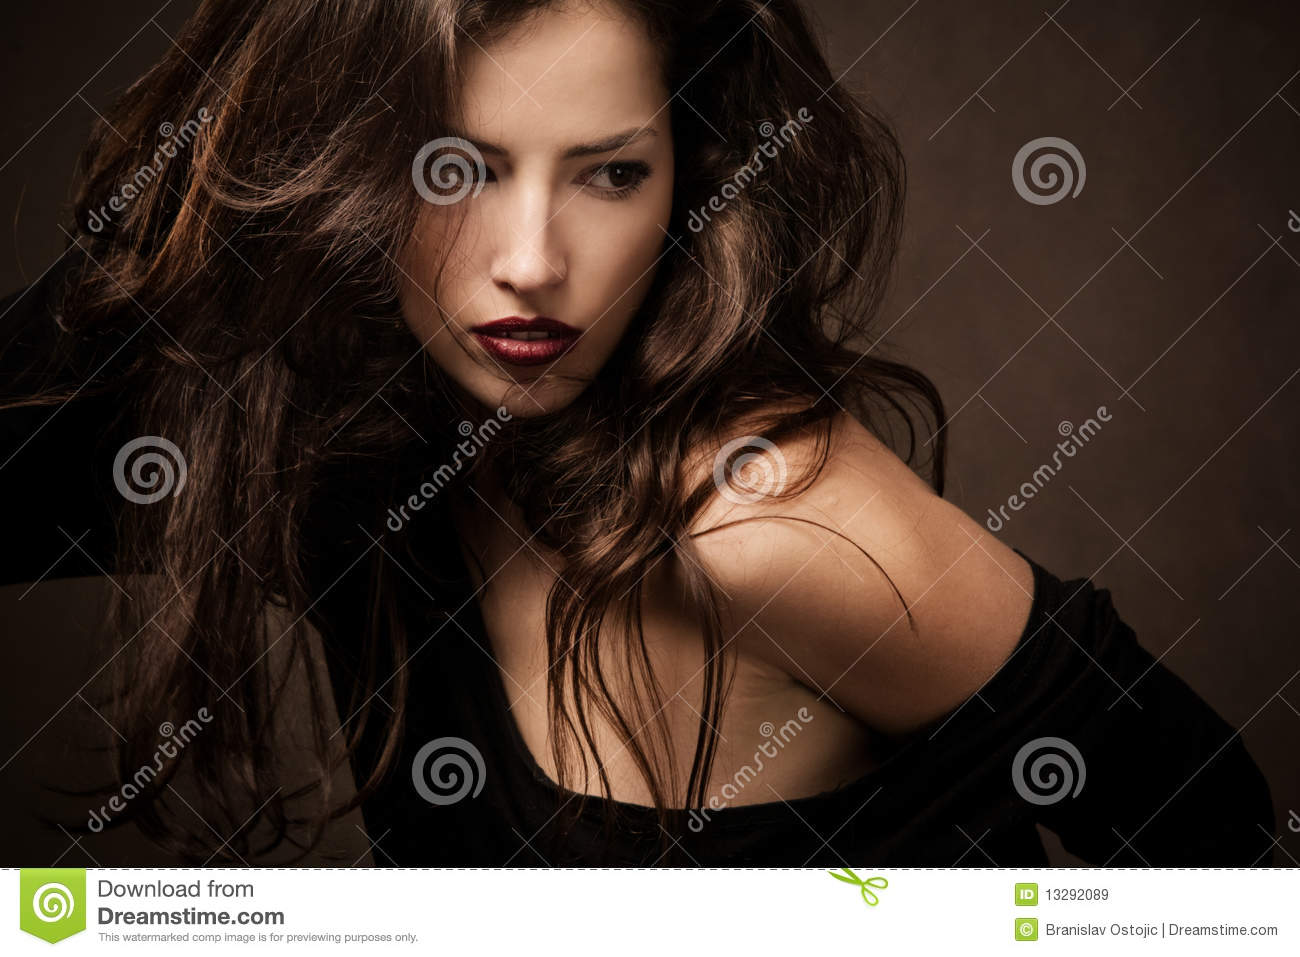 Wild Hair Royalty Free Stock Images   Image  13292089